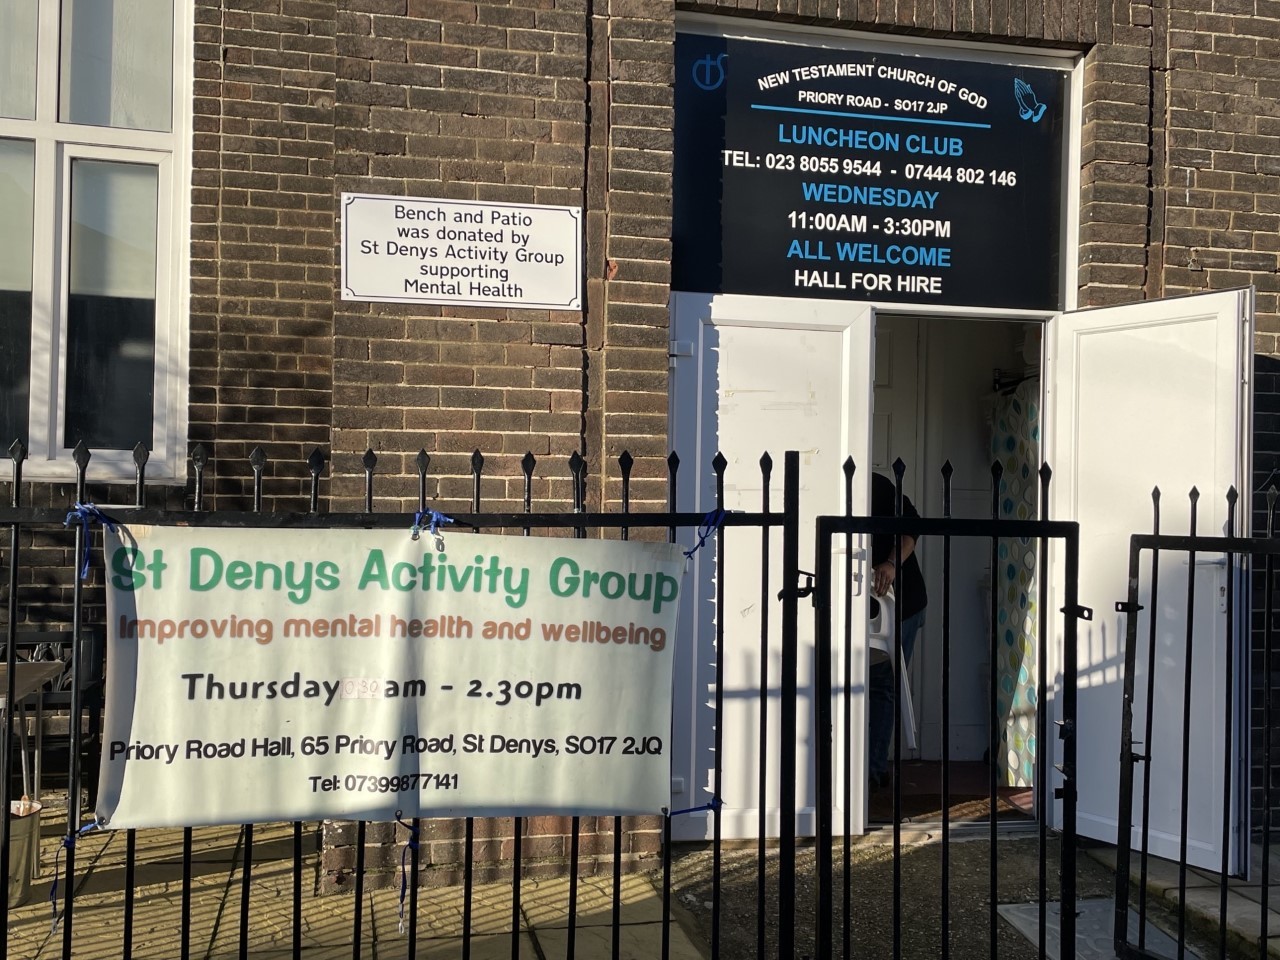 The St Denys Activity Group is located on Priory Road, St Denys.